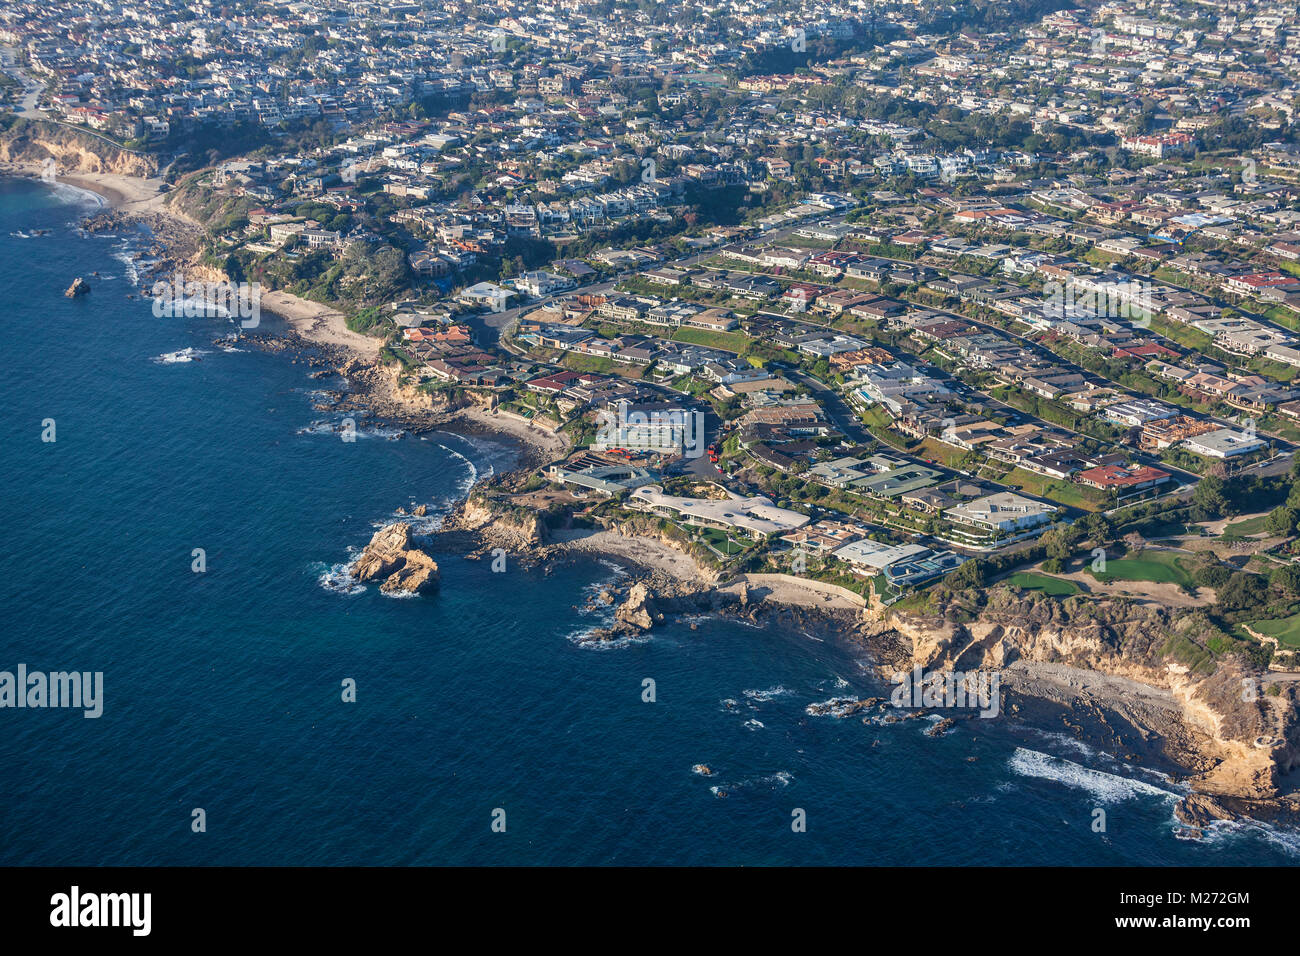 Aerial view of Laguna Beach coves in Southern California. Stock Photo